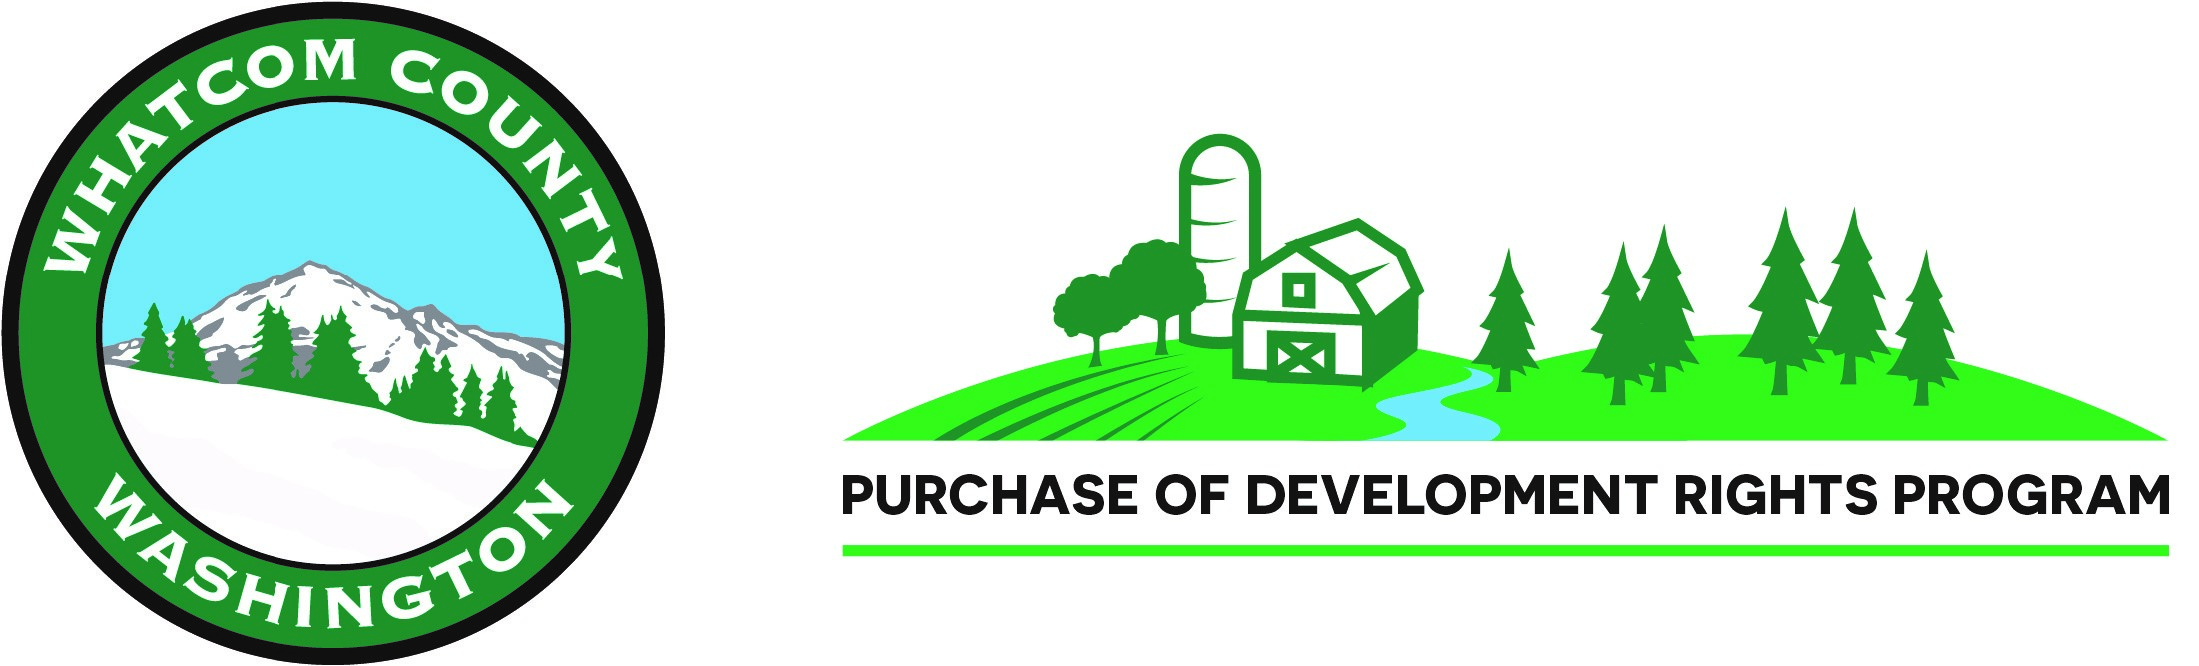 Whatcom County Logo - Overview of Whatcom County Purchase of Development Rights Program